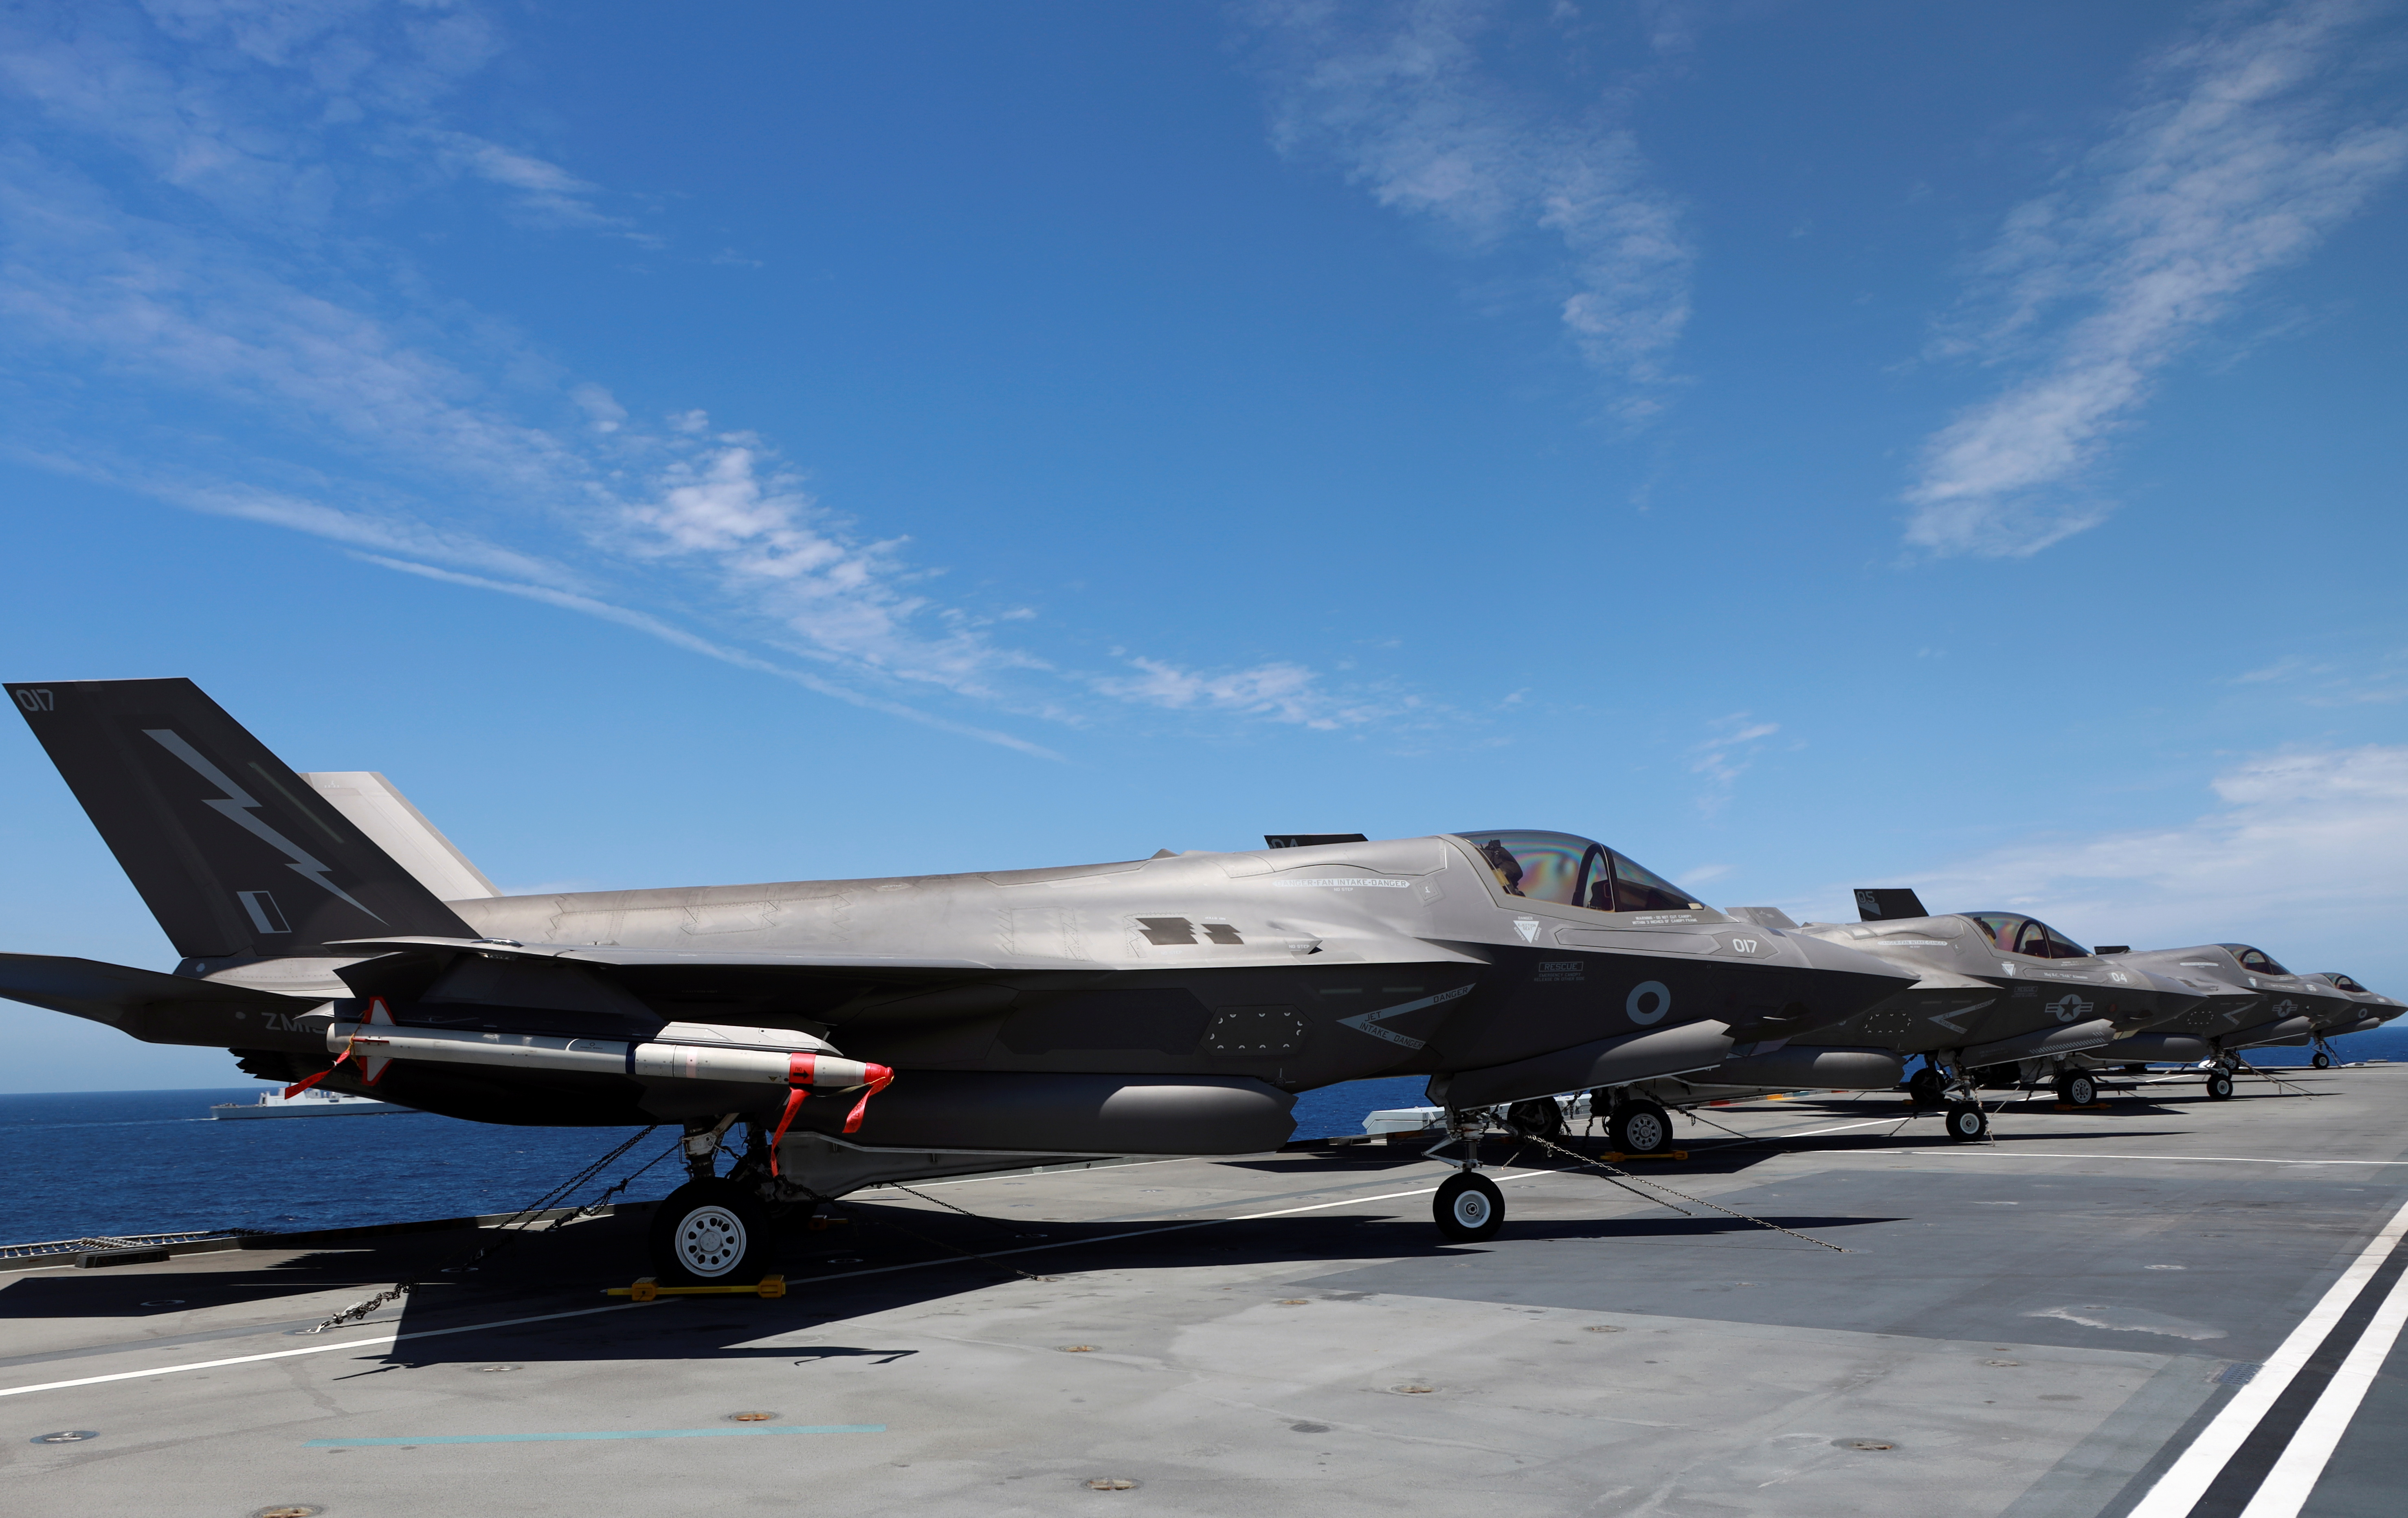 F-35B Lightning II aircrafts are seen on the deck of the HMS Queen Elizabeth aircraft carrier offshore Portugal